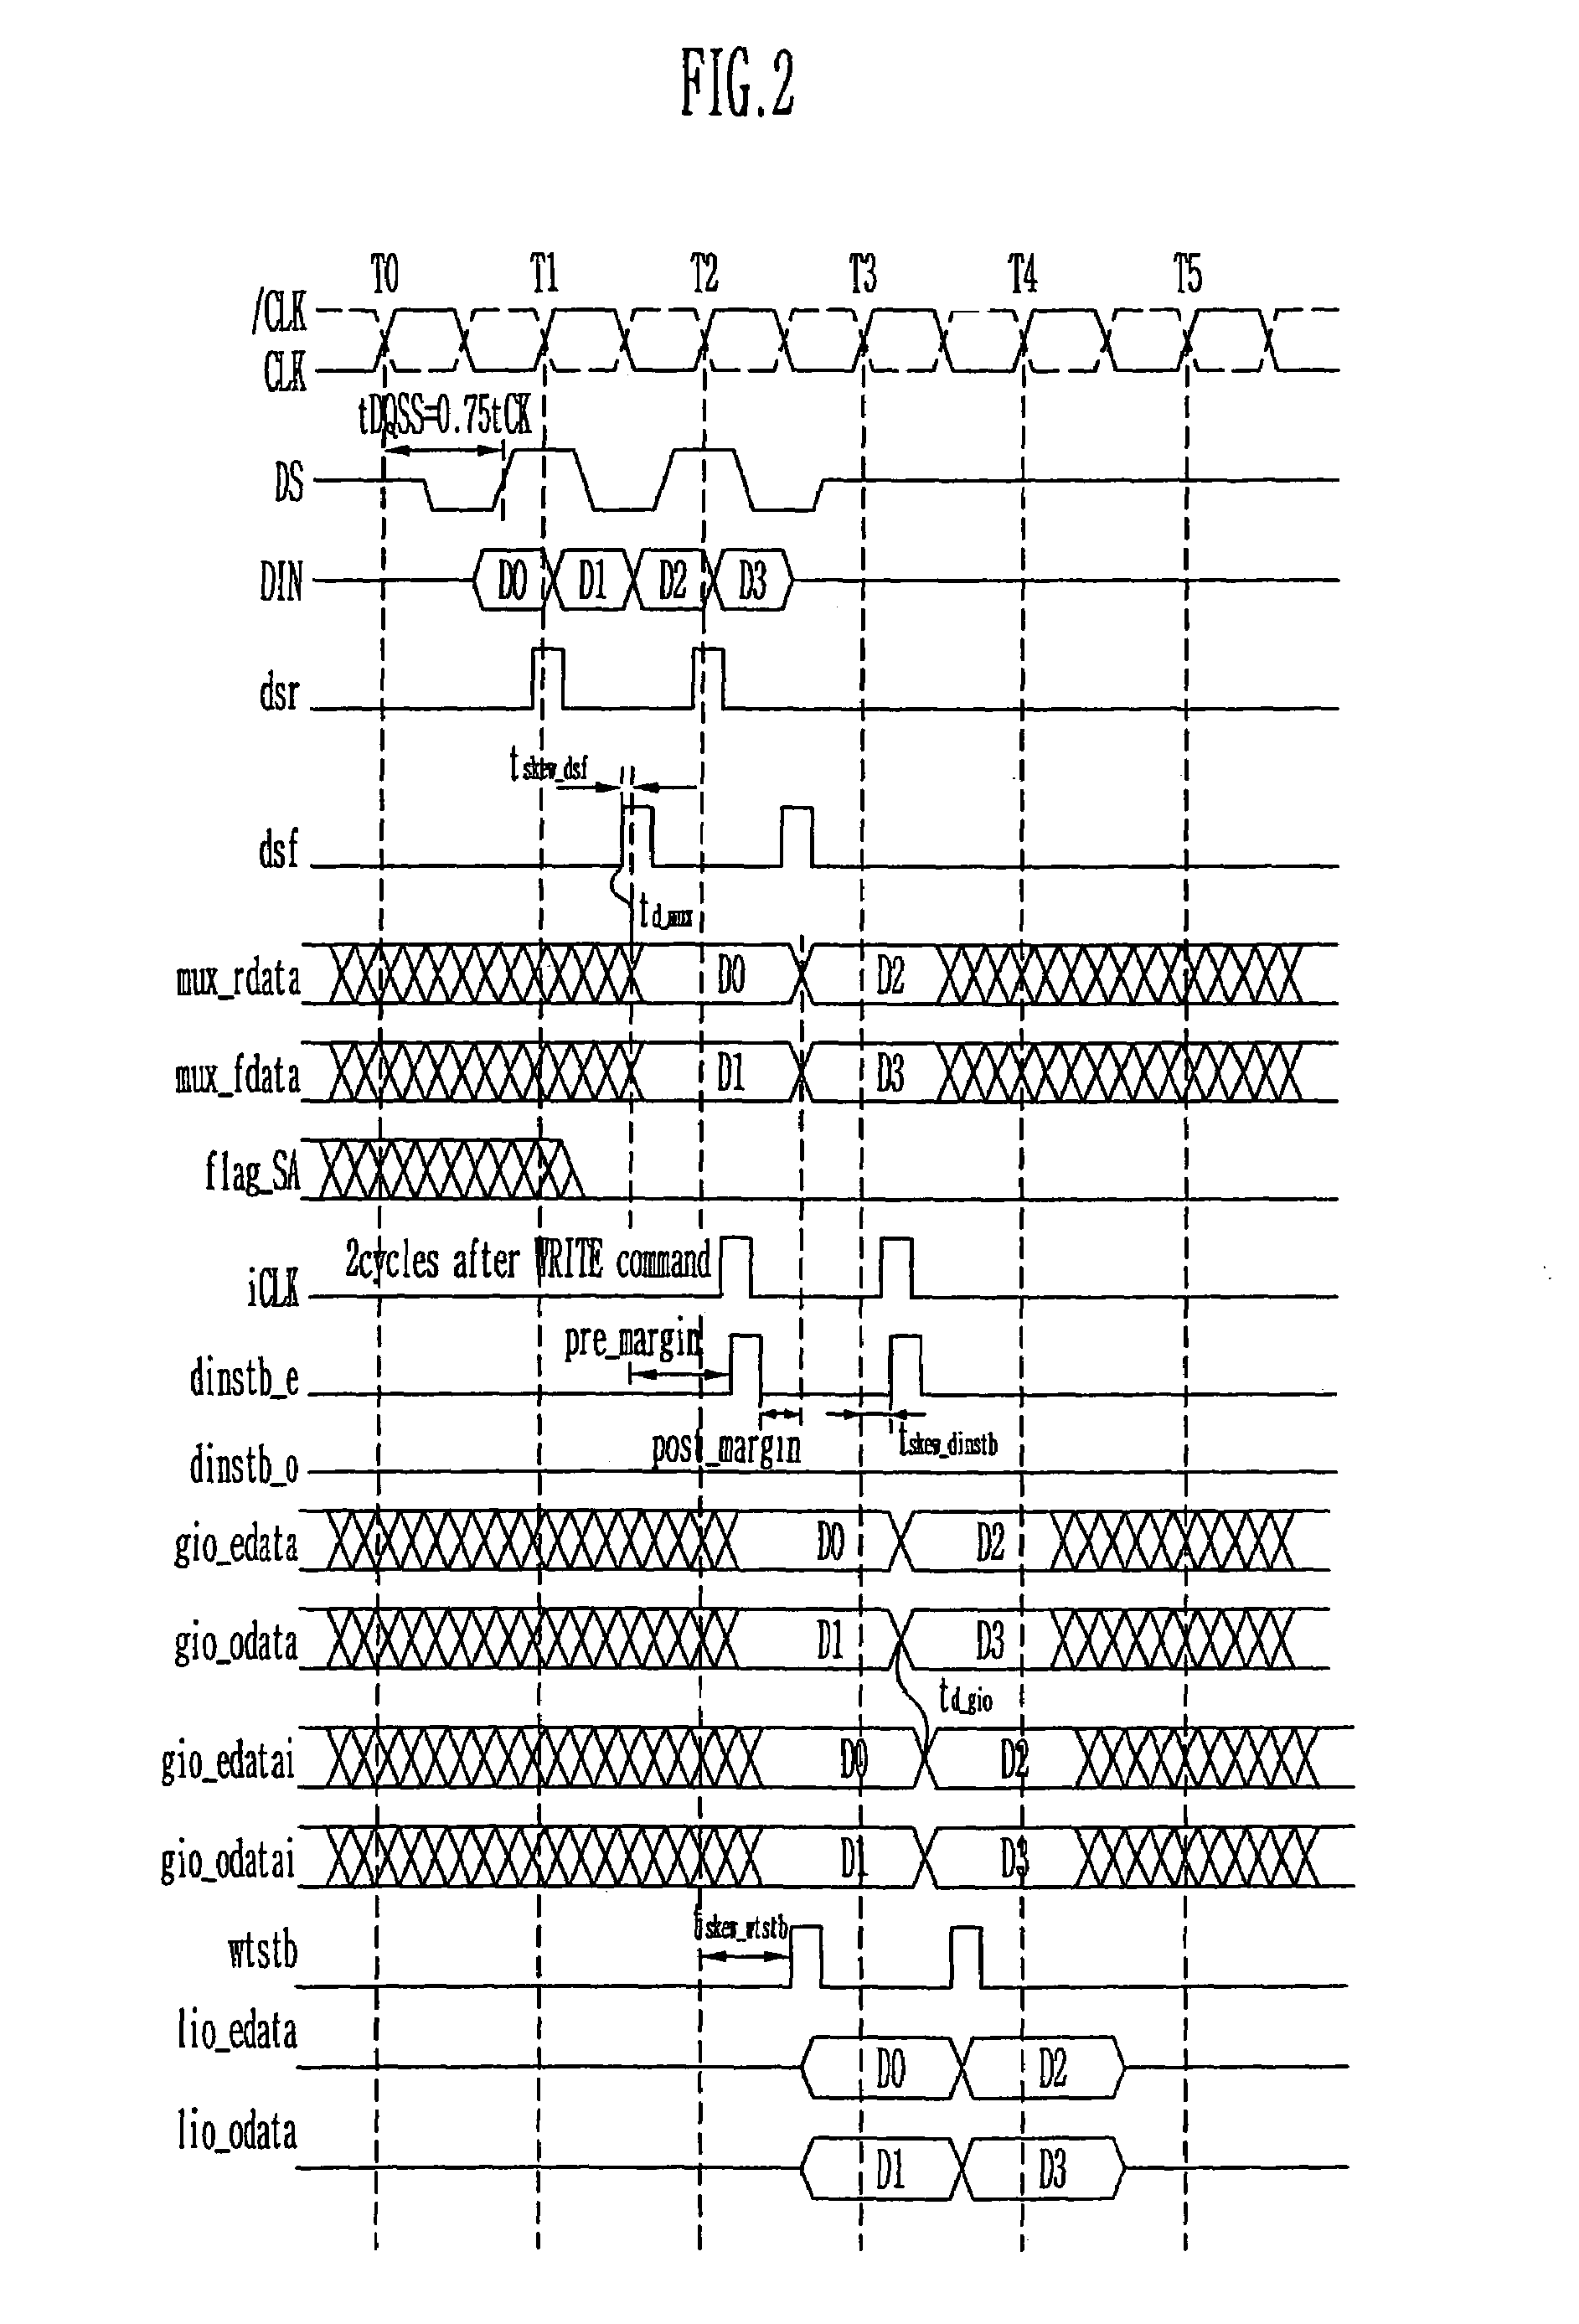 Write circuit of double data rate synchronous DRAM